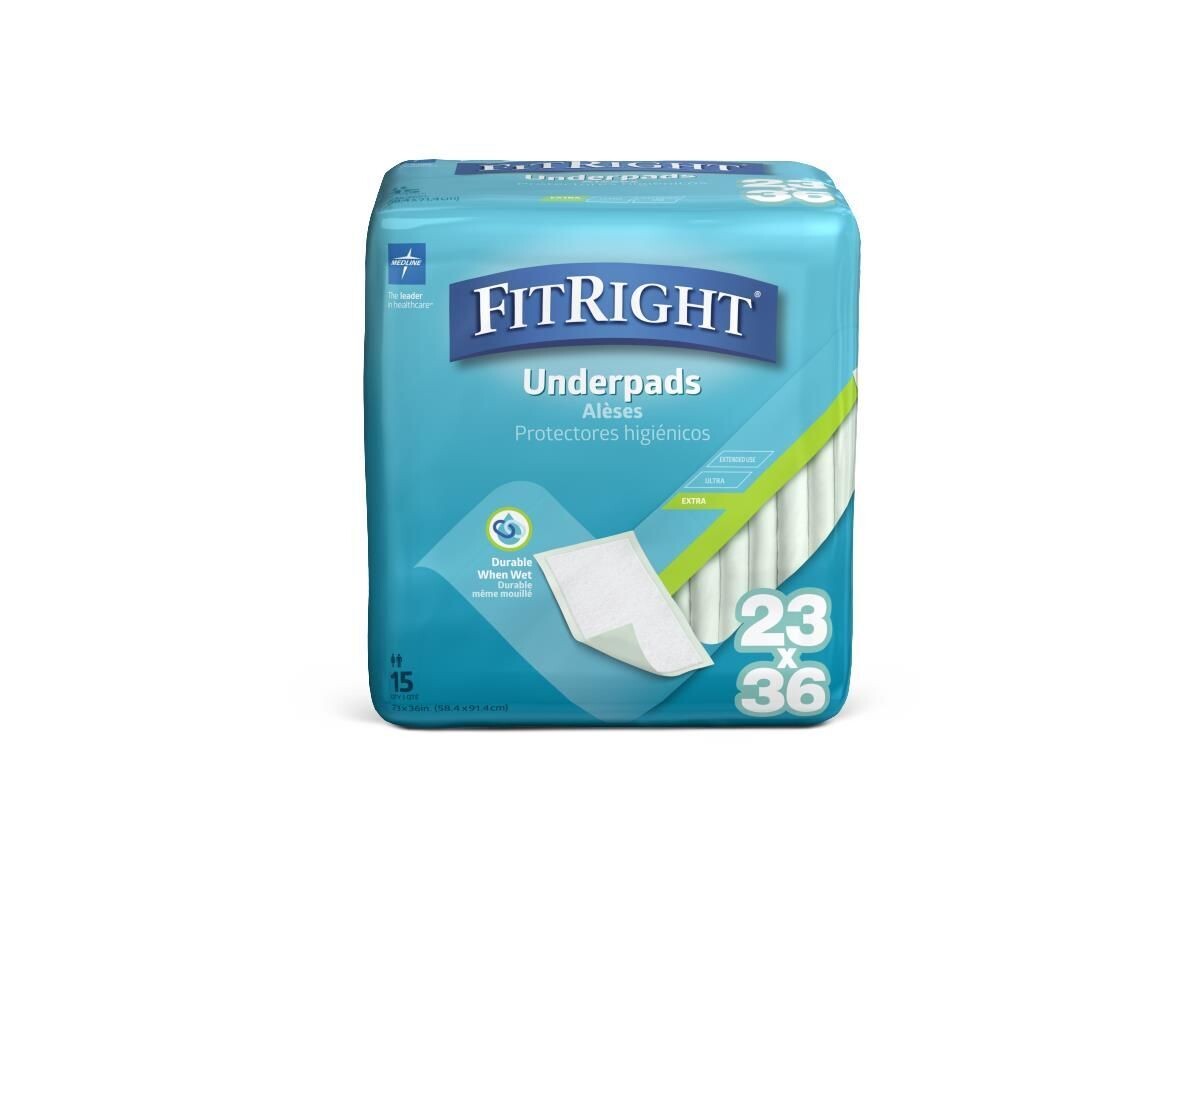 FITRIGHT EXTRA UNDERPADS, 23" X 36", 15/BG